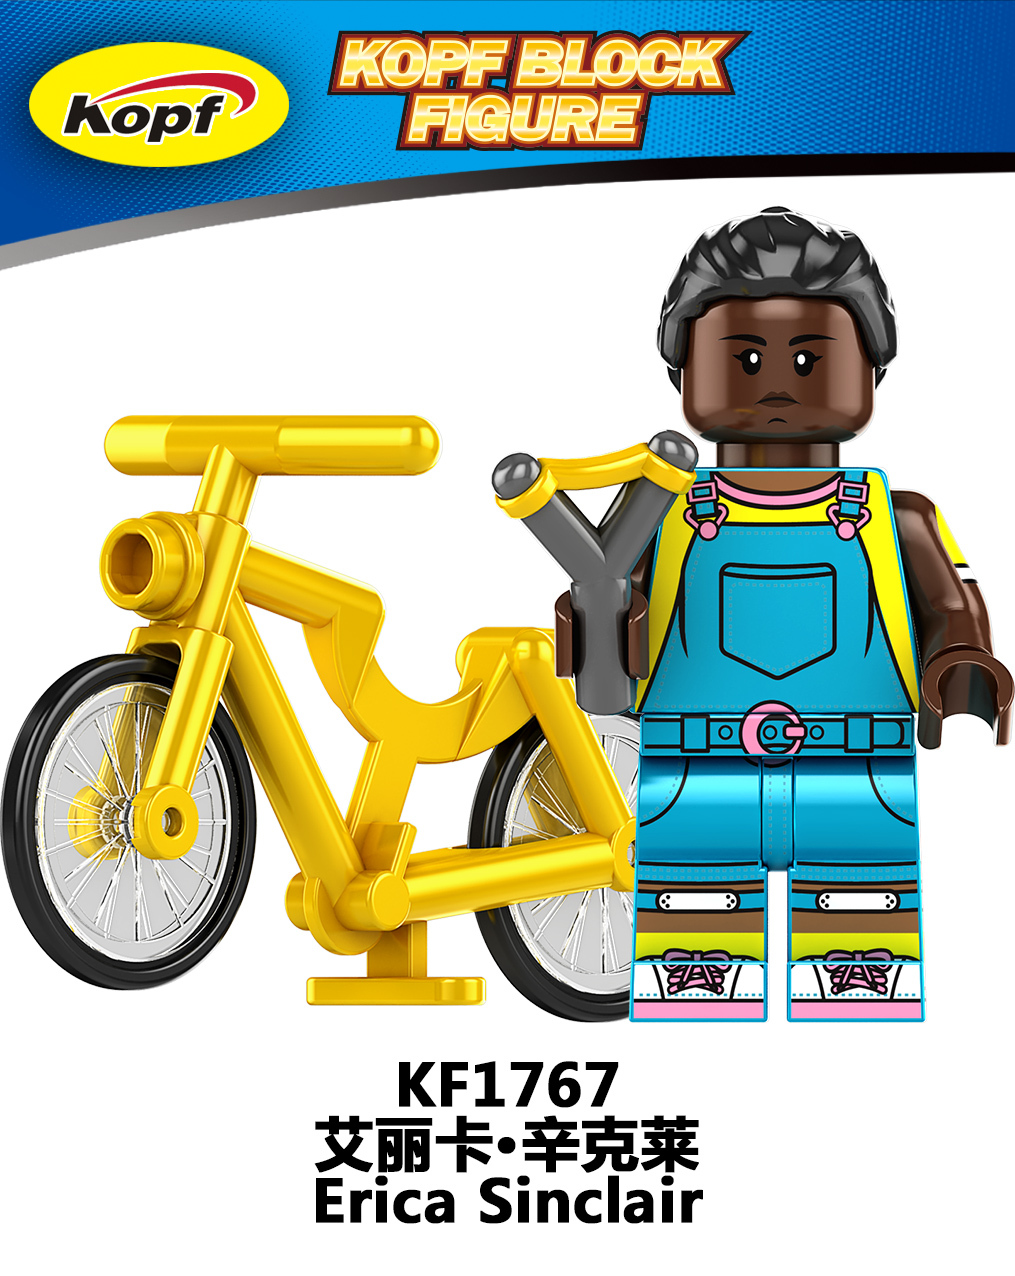 KF6167 KF1763 KF1764 KF1765 KF1766 KF1767 KF1768 KF1769 KF1770 CY1001 Stranger Things Mini Building Blocks Action Figures Educational Toys For Kids Gifts 